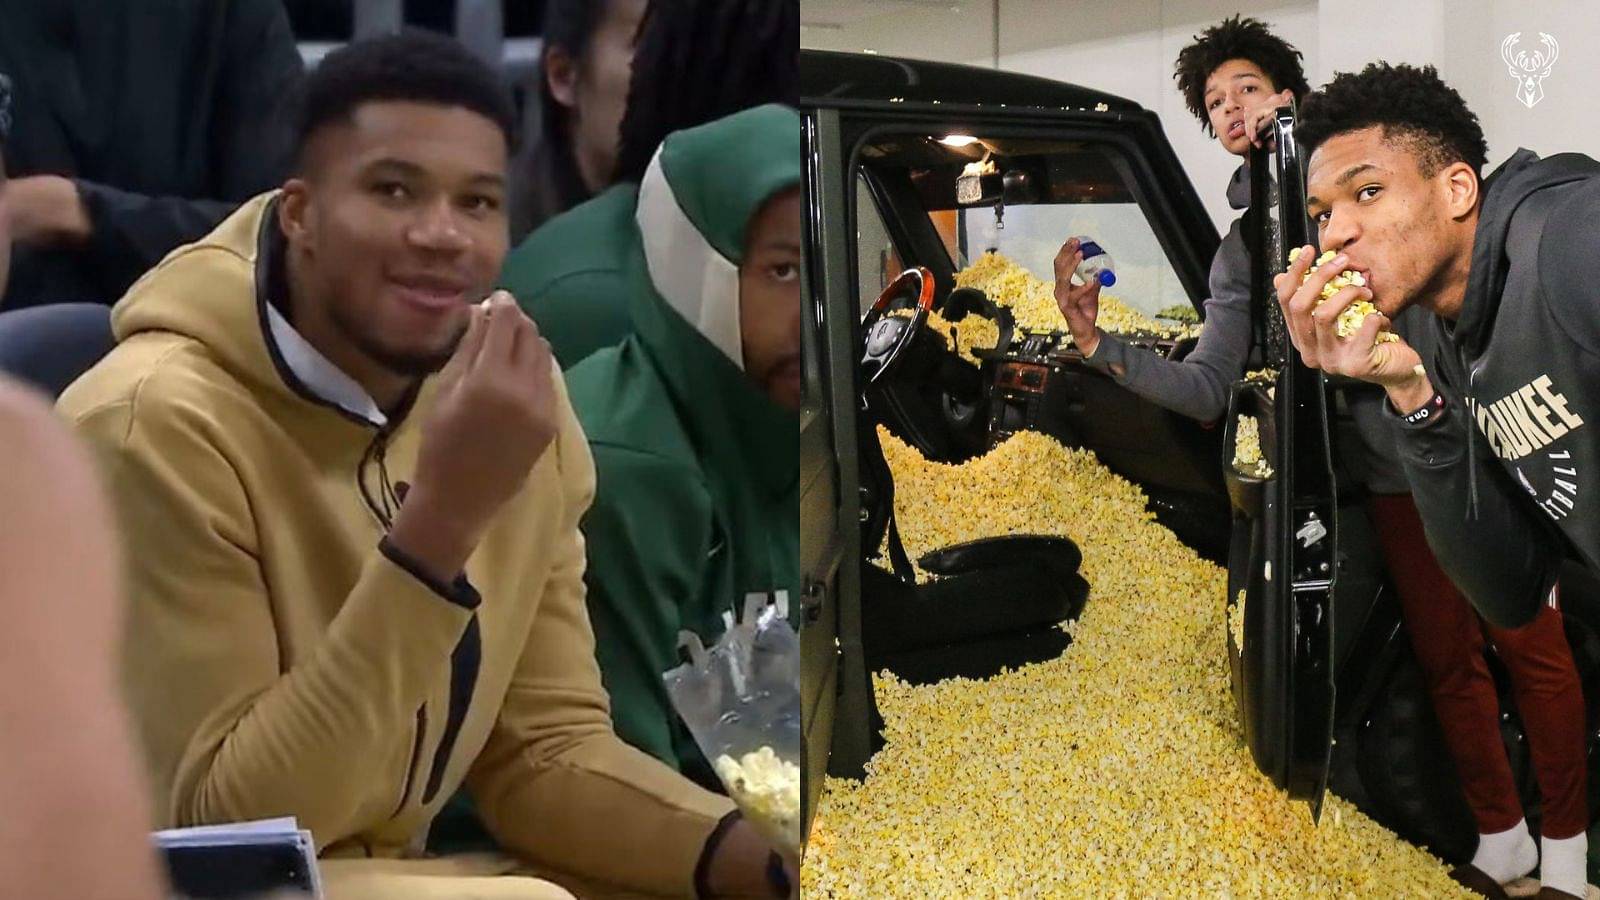 WATCH: Giannis Antetokounmpo Enjoying Popcorns More Than Any Adult You've Ever Seen